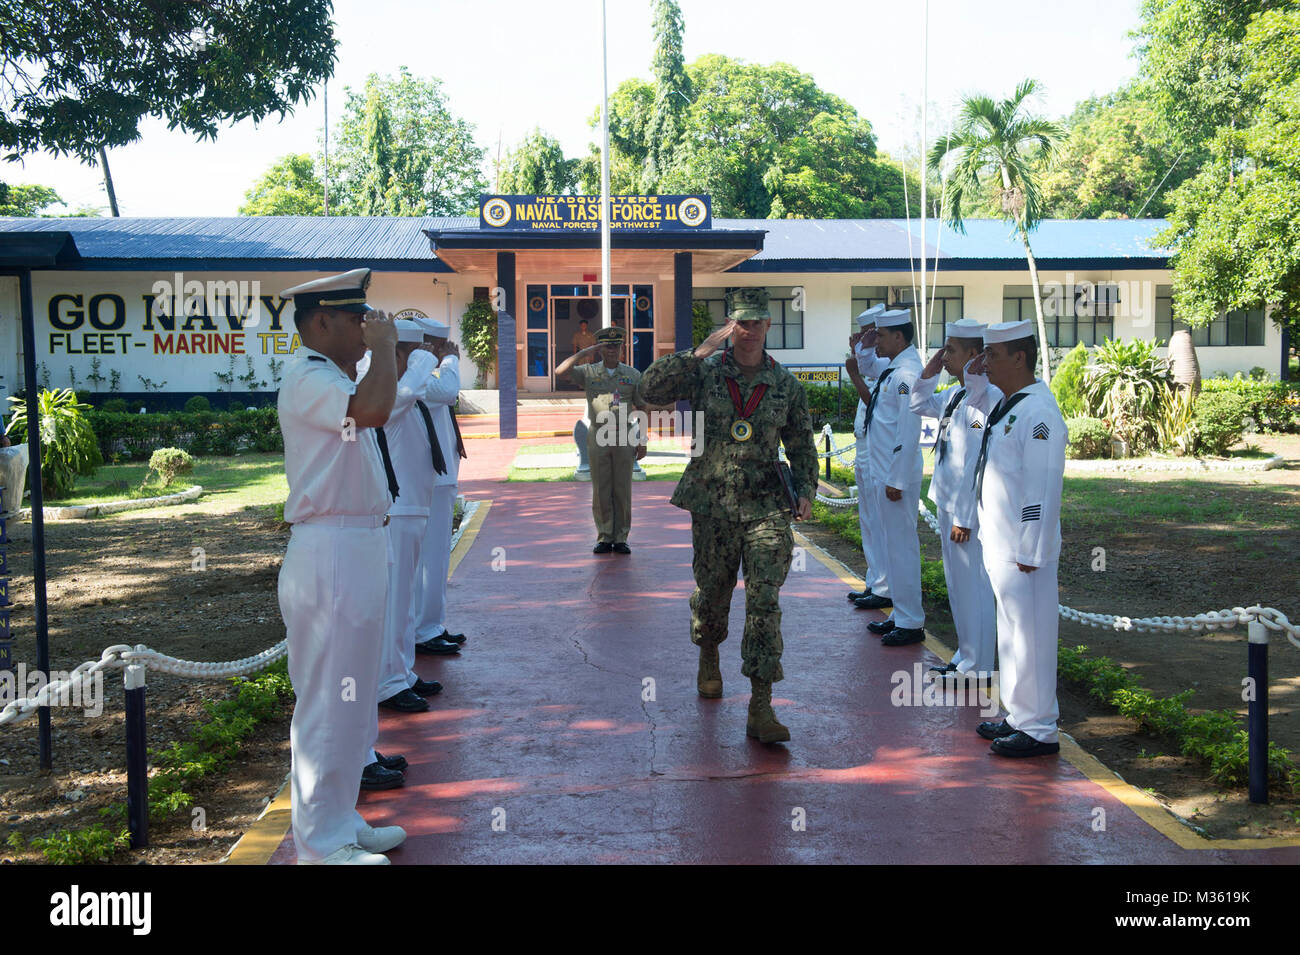 150806-M-RB060-007  SAN FERNANDO CITY, Philippines (Aug. 5, 2015) Capt. James Meyer, commodore of Task Force Forager, salutes Philippine sailors after meeting with Philippine navy Capt. Albert Mogol. Task Force Forager is in the Philippines providing medical and engineering assistance. Task Force Forager, embarked aboard the Military Sealift Command joint high speed vessel USNS Millinocket (JHSV 3) is serving as the secondary platform for Pacific Partnership 2015, led by an expeditionary command element from the Navy's 30th Naval Construction Regiment (30 NCR) from Port Hueneme, Calif. Now in  Stock Photo